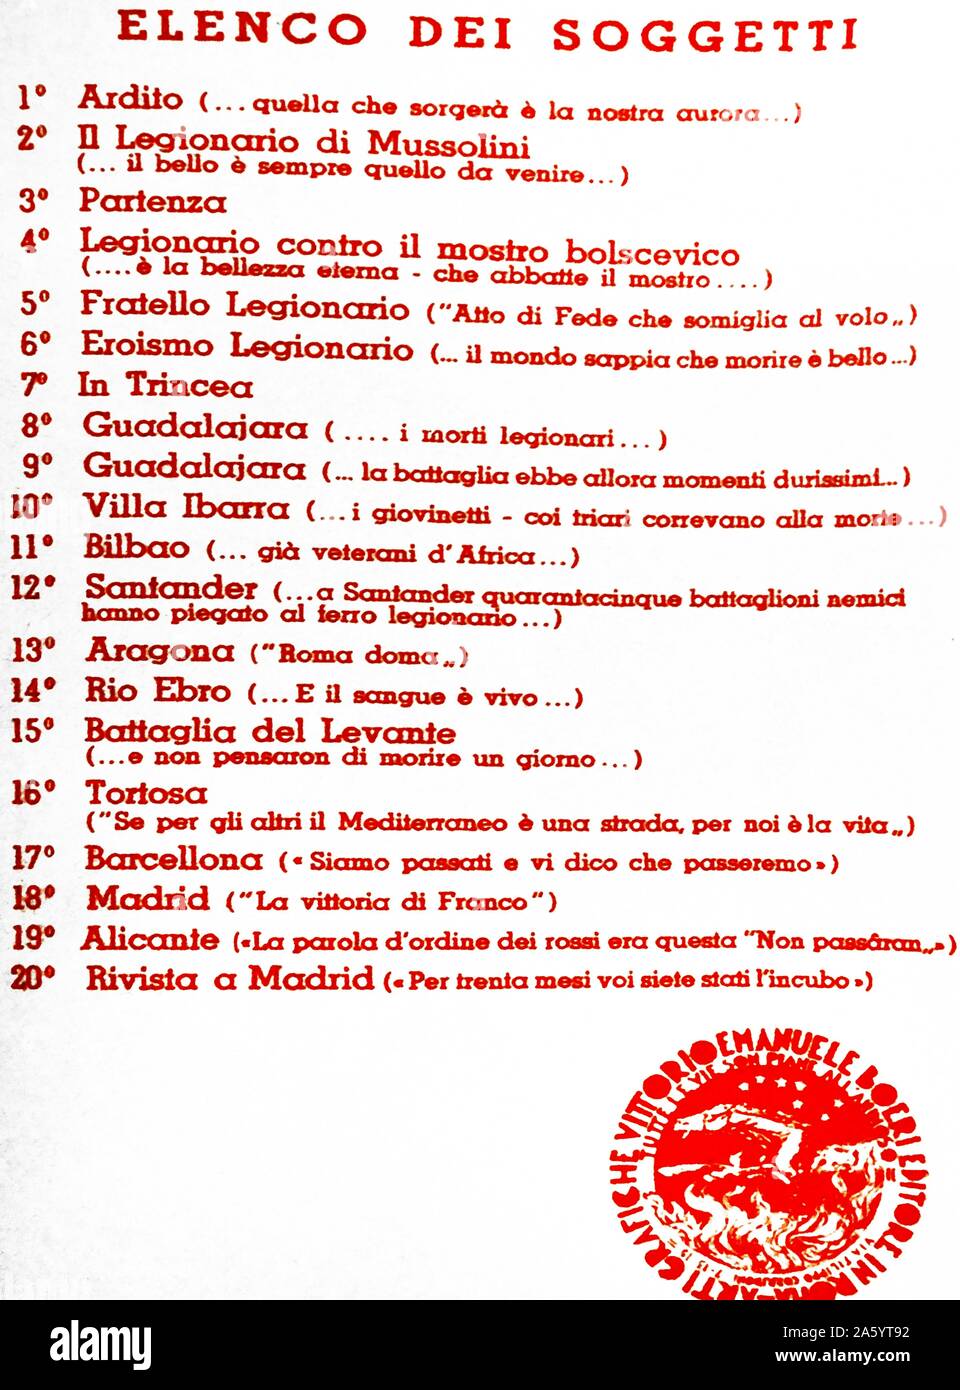 Official elenco dei soggetti (list of subjects), concerning the Italian fascist participation during the Spanish Civil War Stock Photo